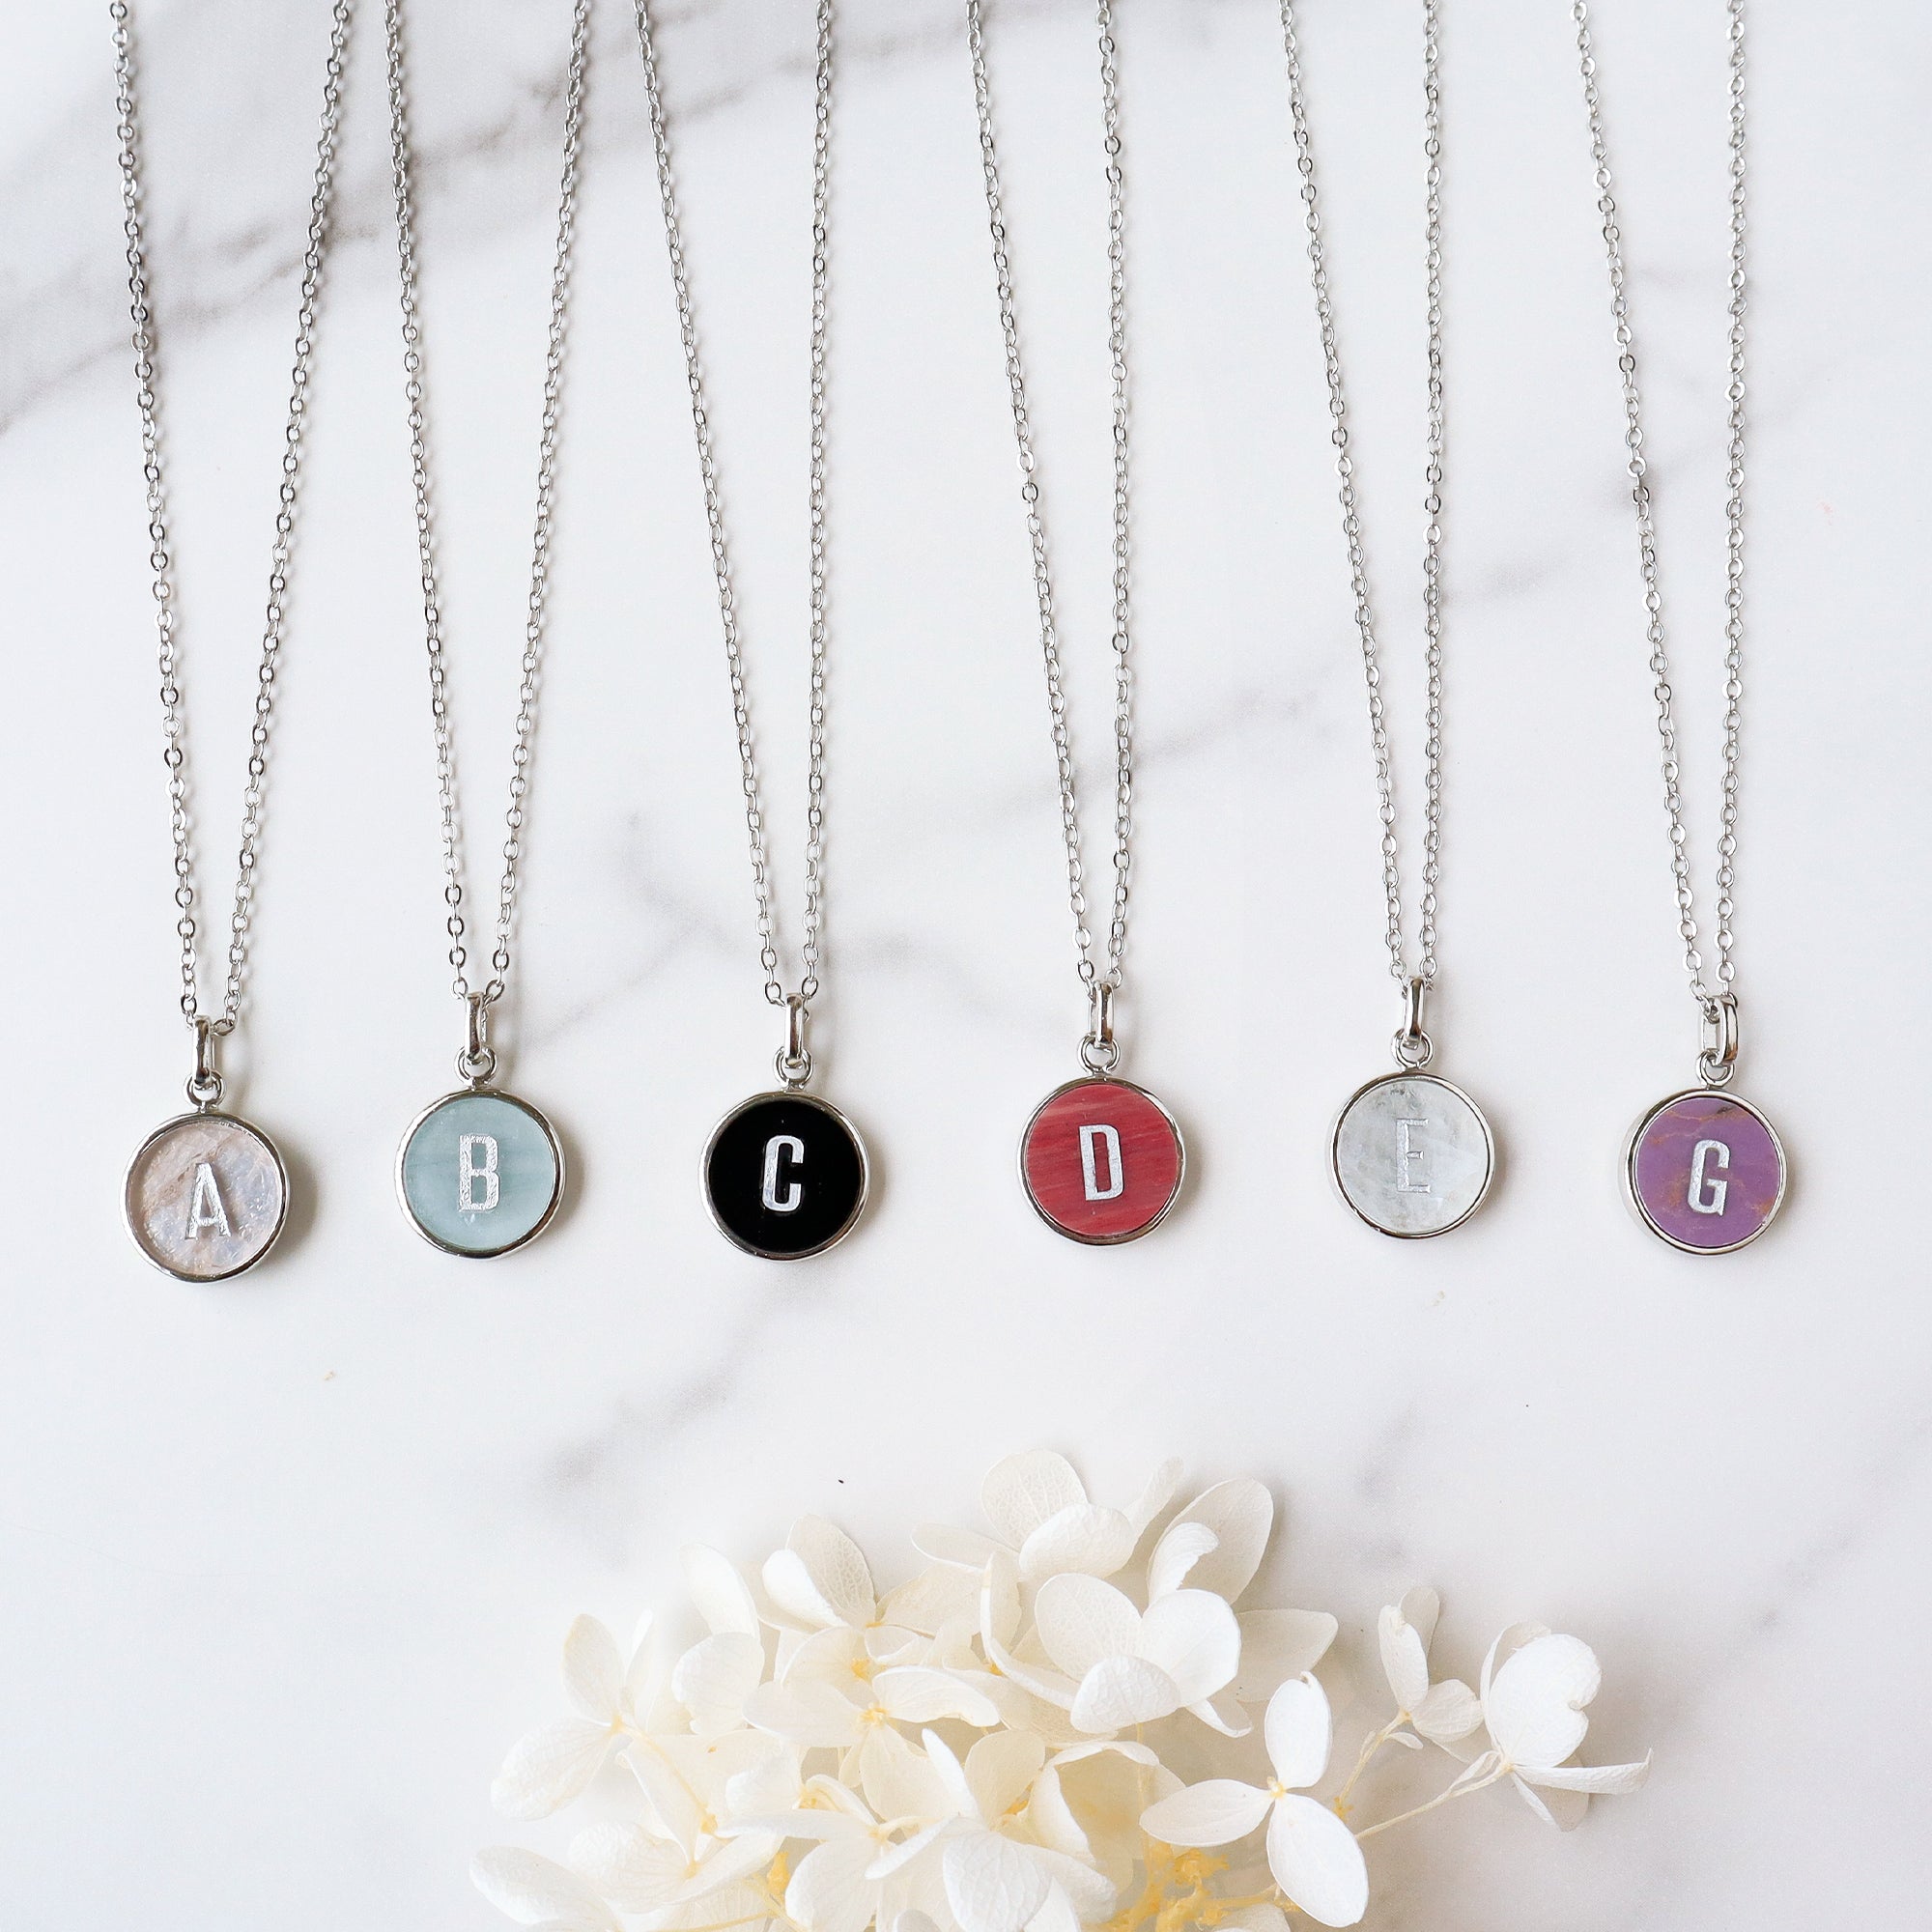 16" Silver Plated Round Gemstone Carved Initial Letter Necklace, Natural Amazonite Rose Quartz Aquamarine Labradorite Turquoise Necklace, Healing Jewelry KZ035